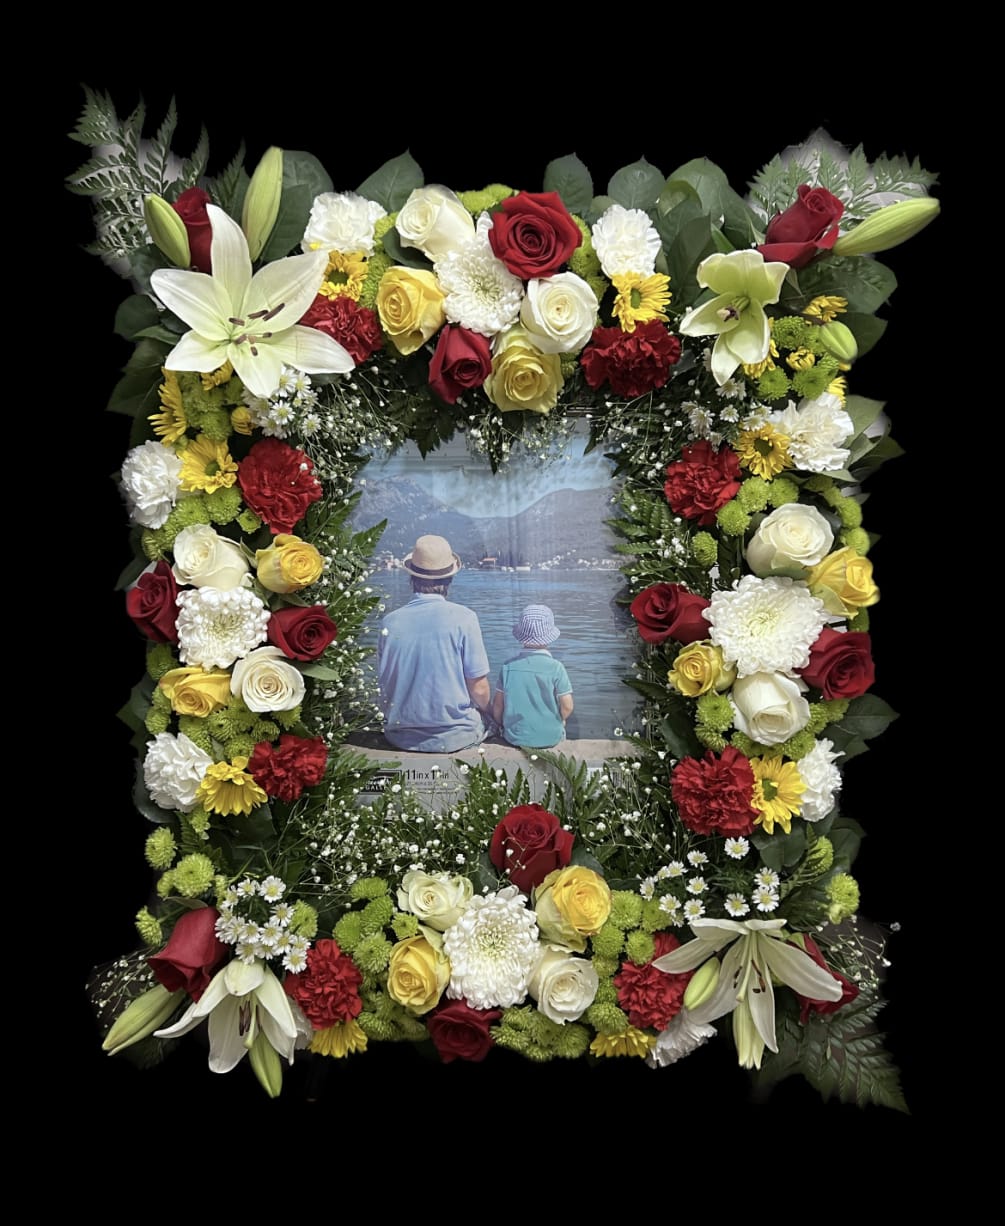 Red, Yellow and White Funeral picture arrangement (15x17 frame size)